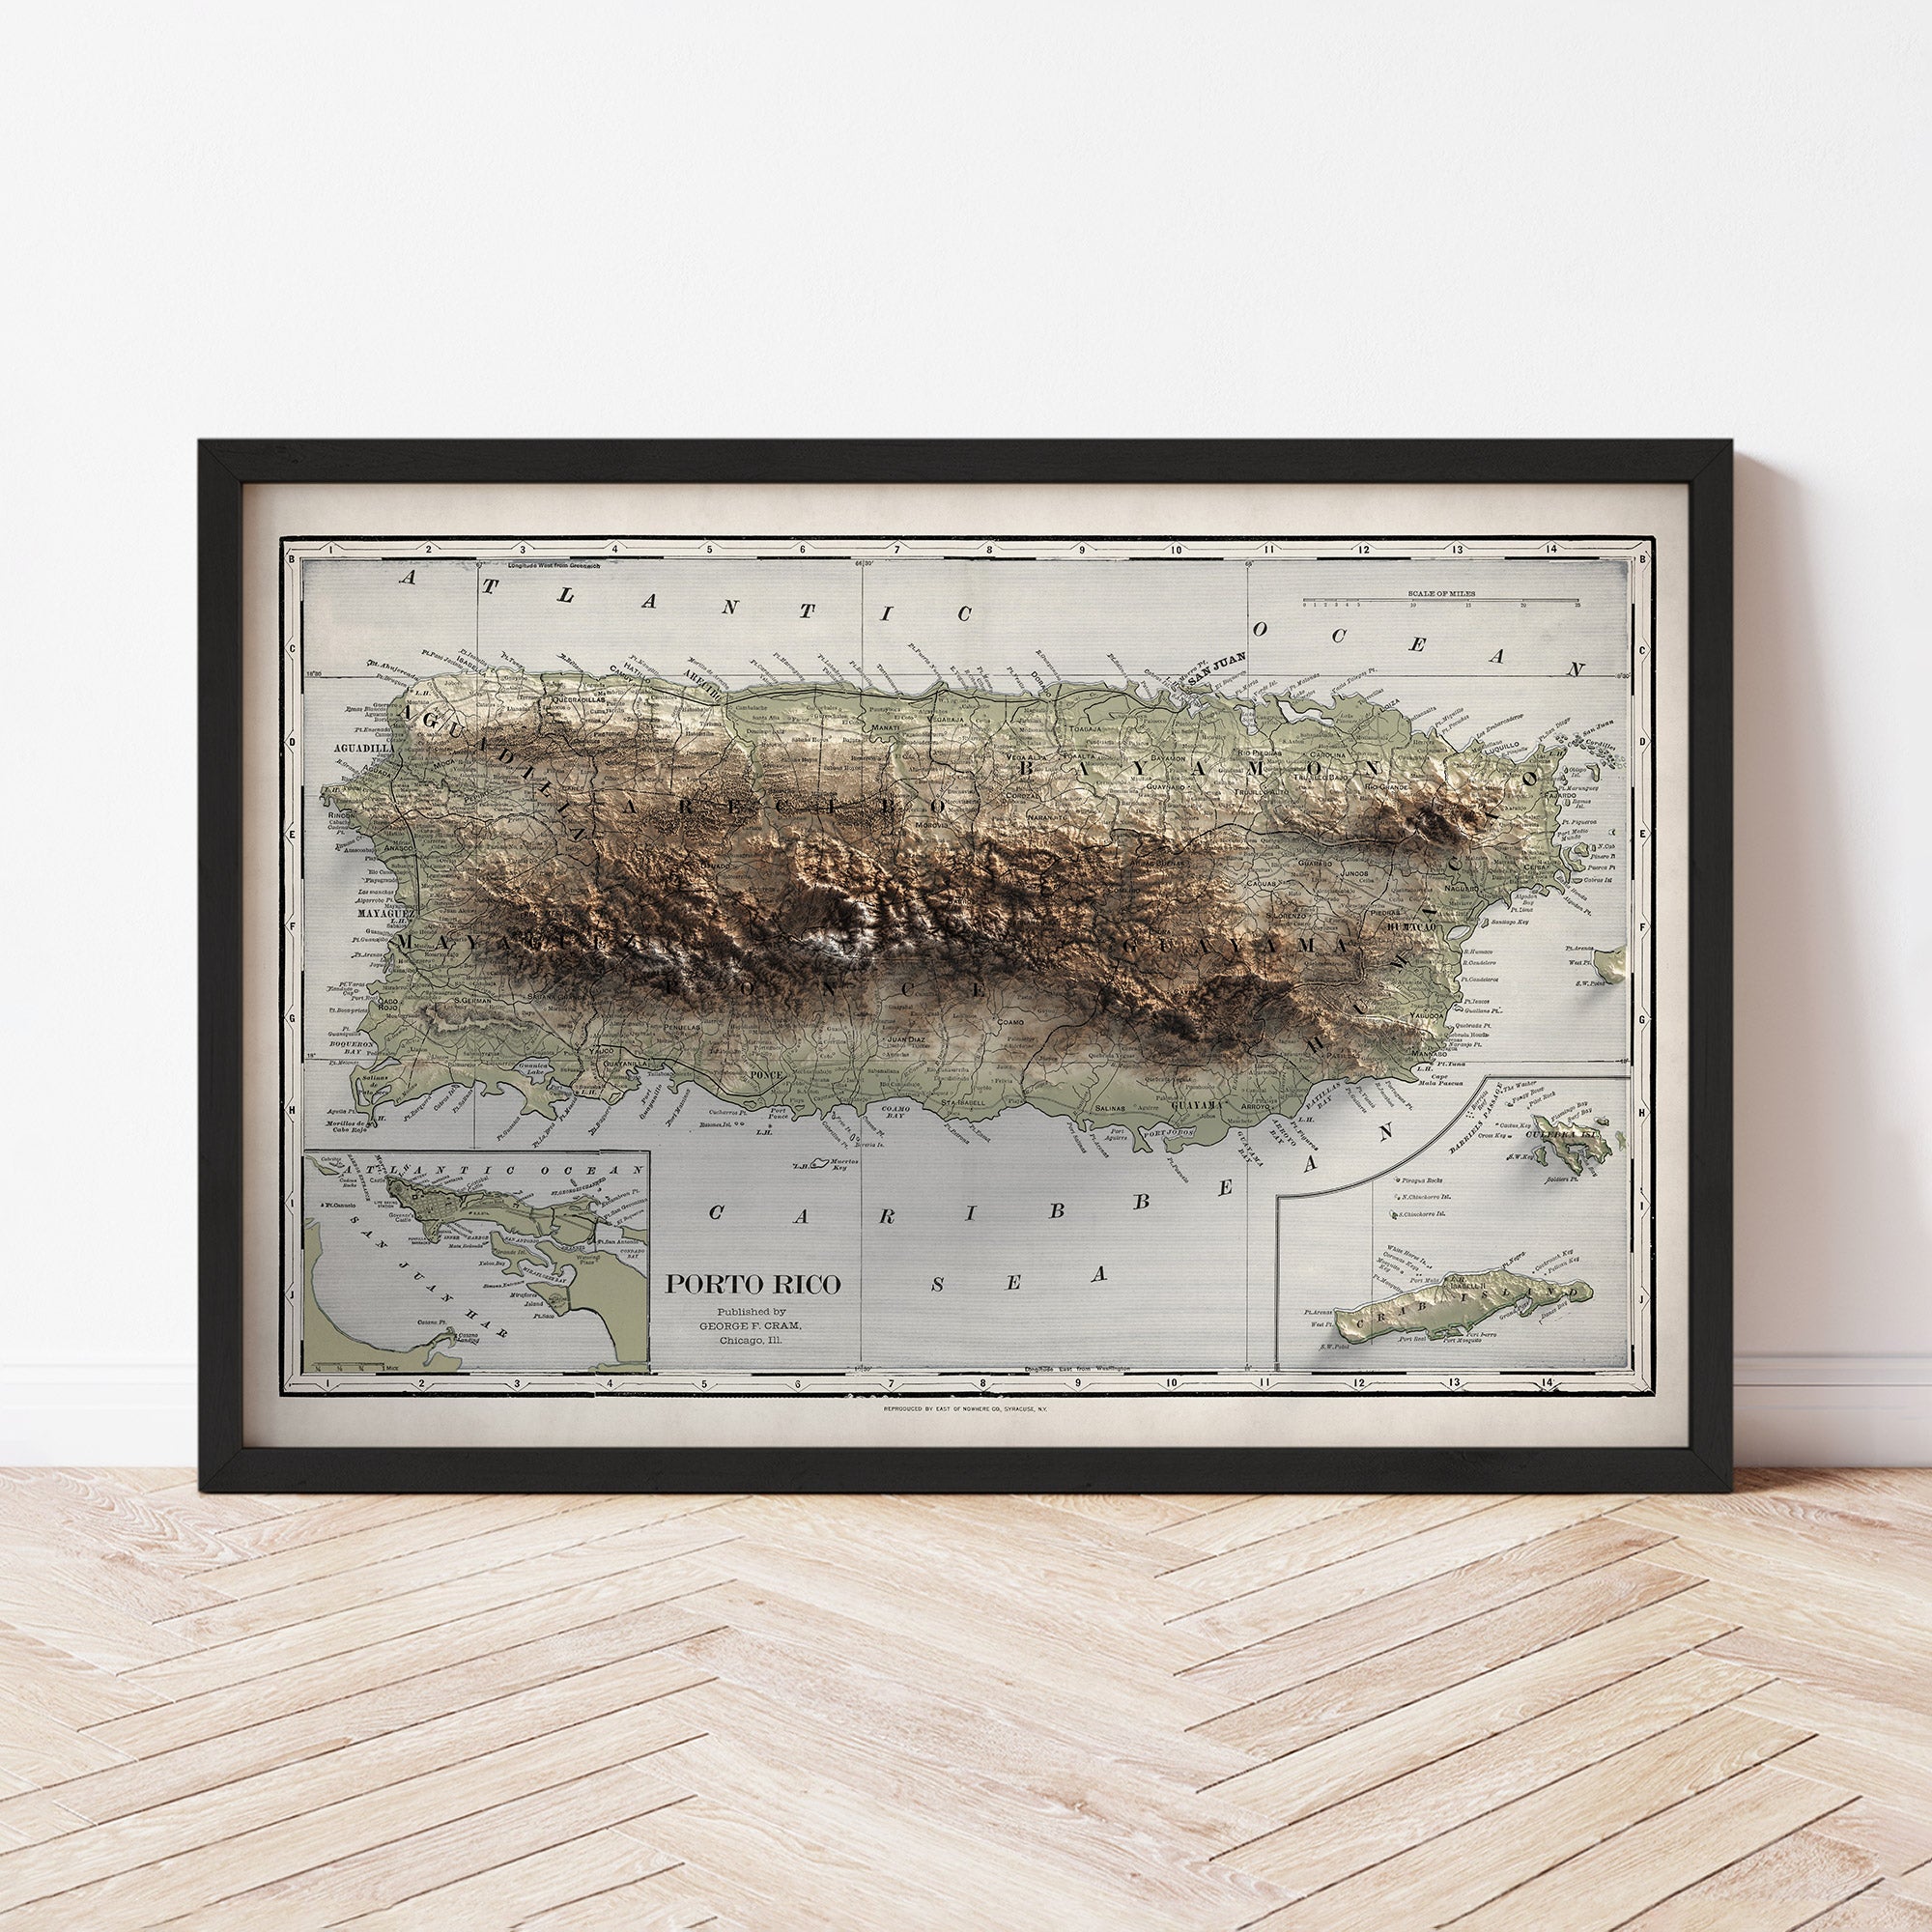 Puerto Rico - Vintage Shaded Relief Map (1901)